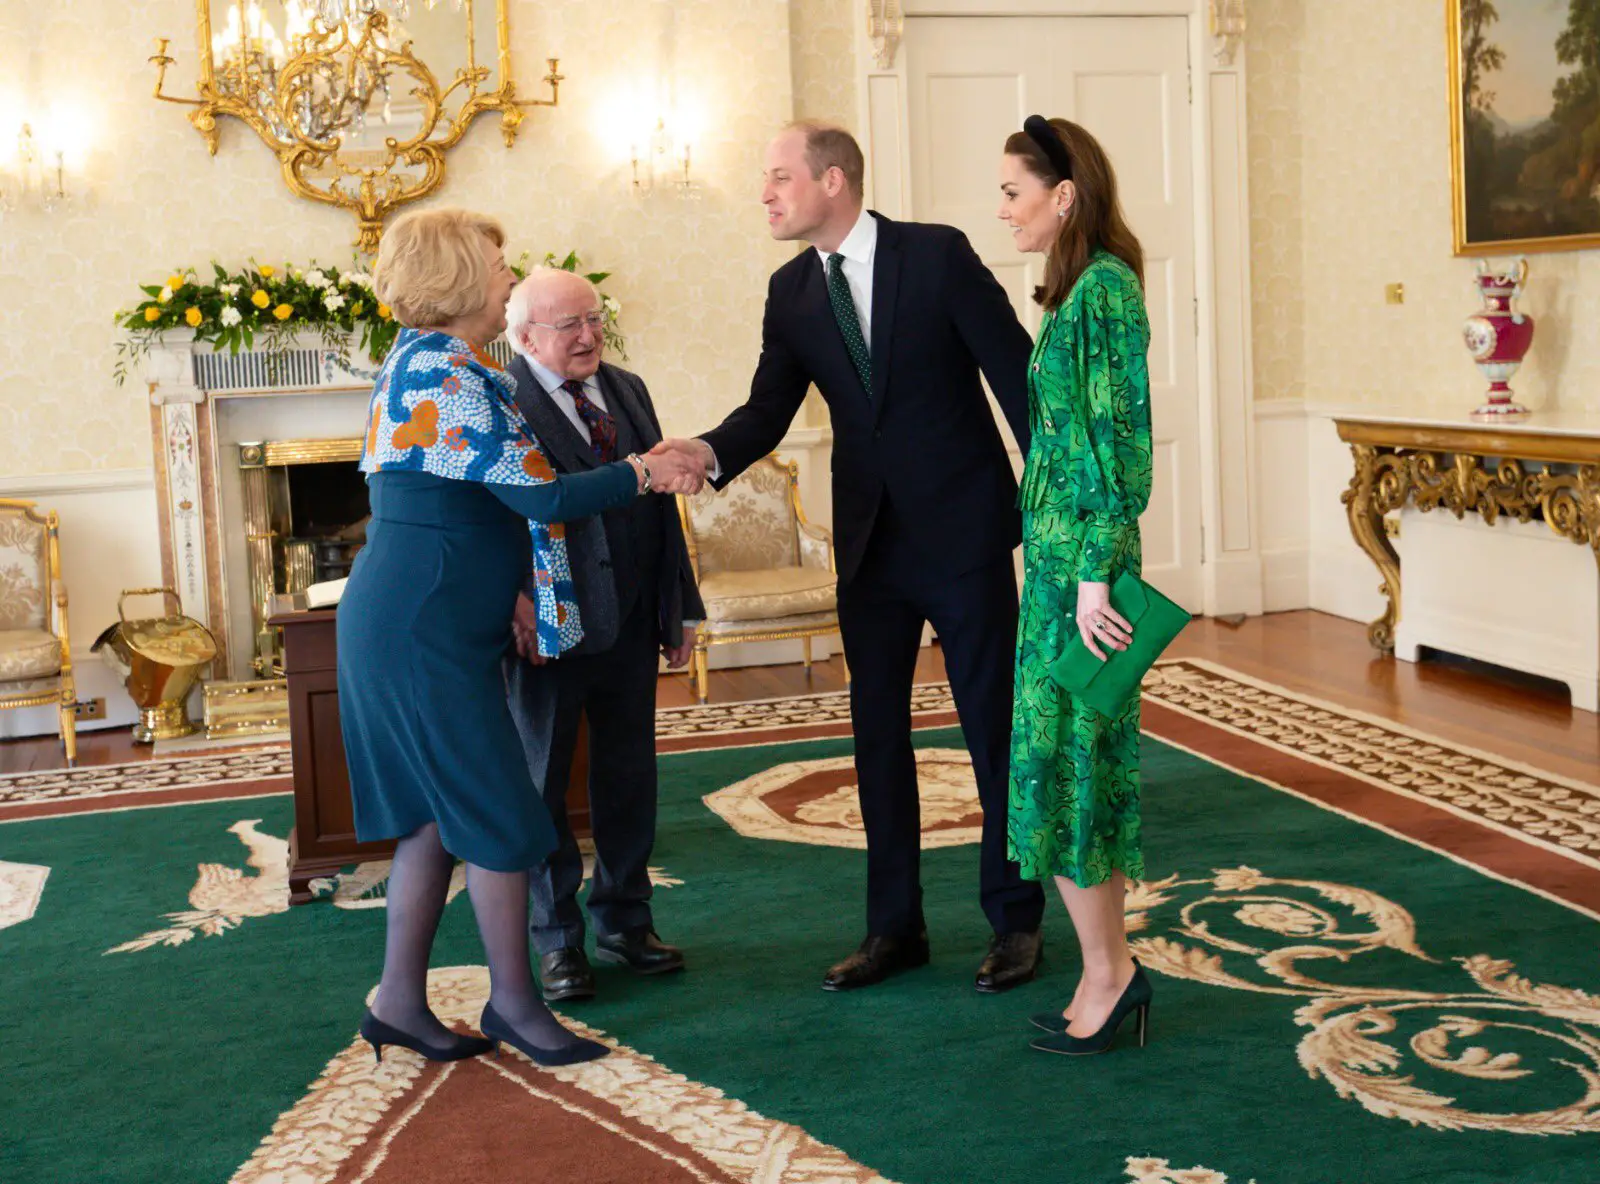 the Duke and Duchess started their day in Ireland by meeting the Irish President Michael D Higgins and First Lady Sabina Higgins